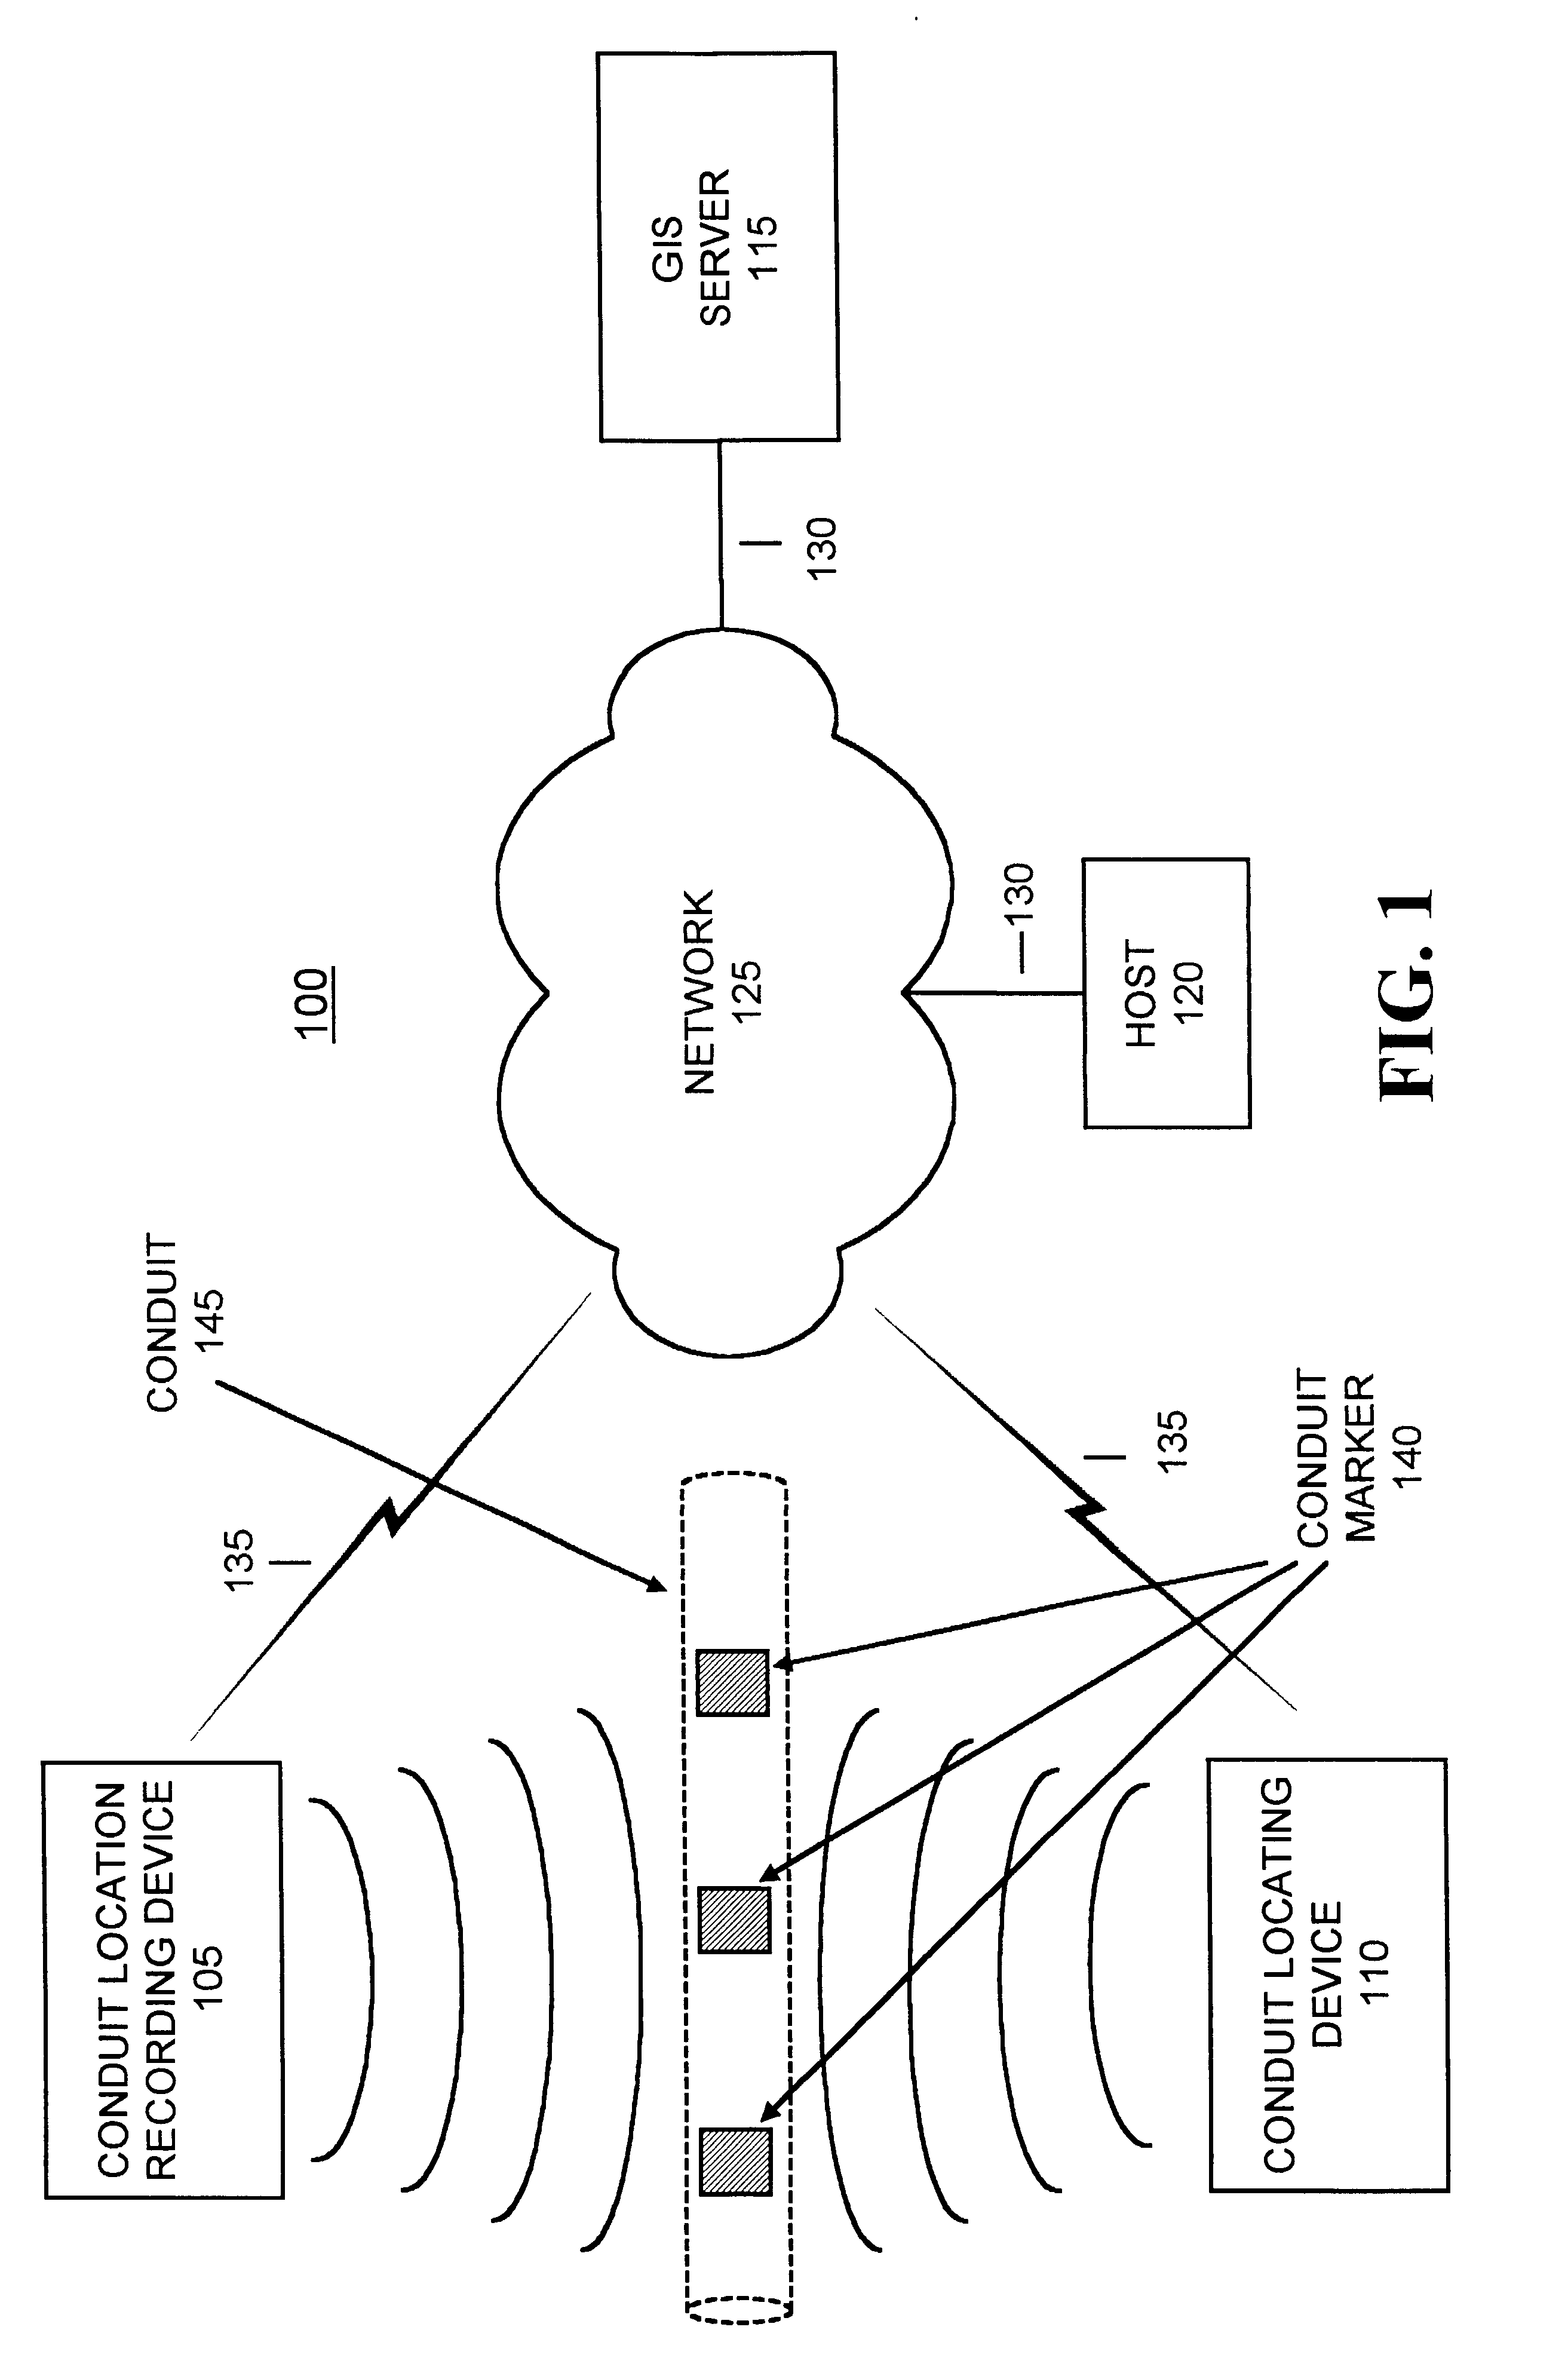 Systems and methods for identifying and mapping conduit location